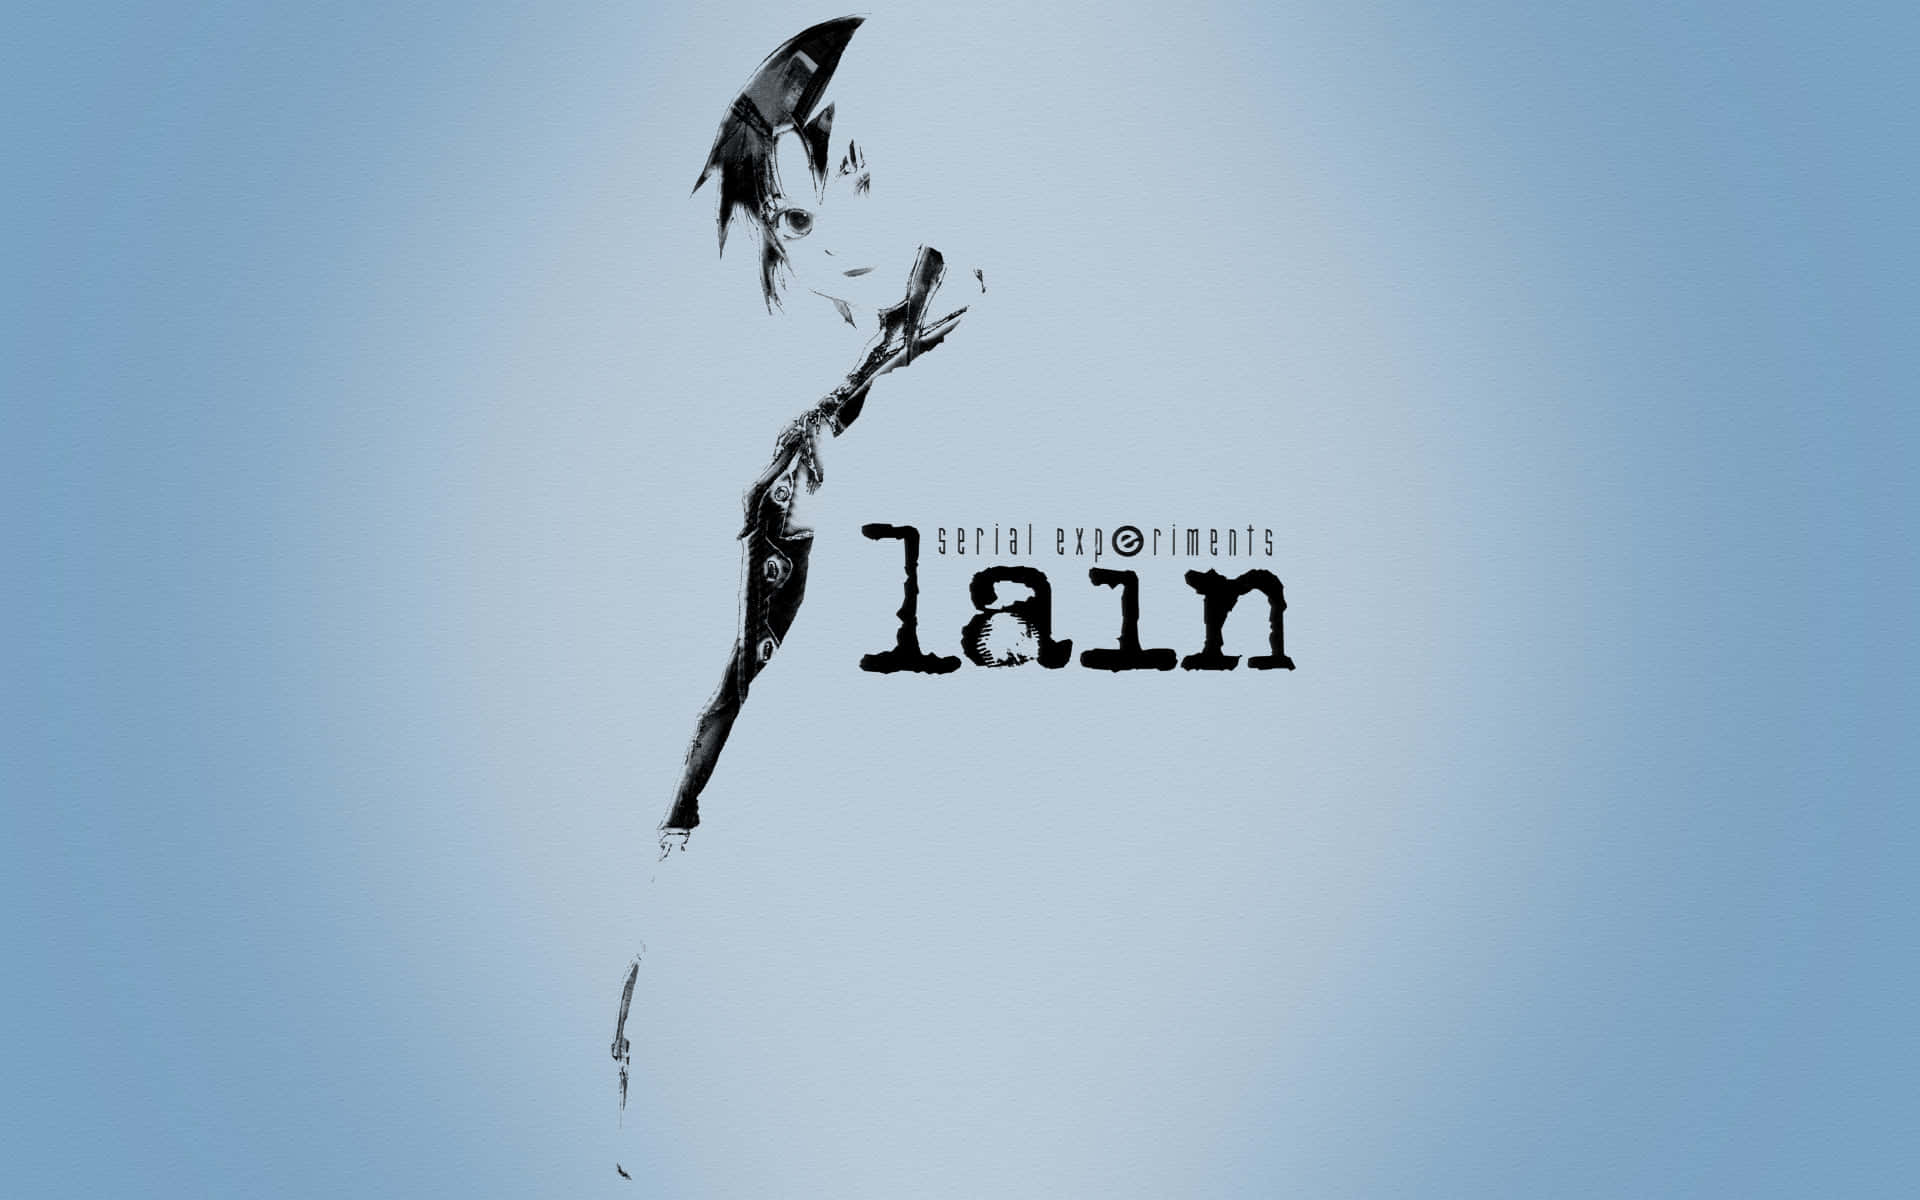 the cover of the book lain Wallpaper